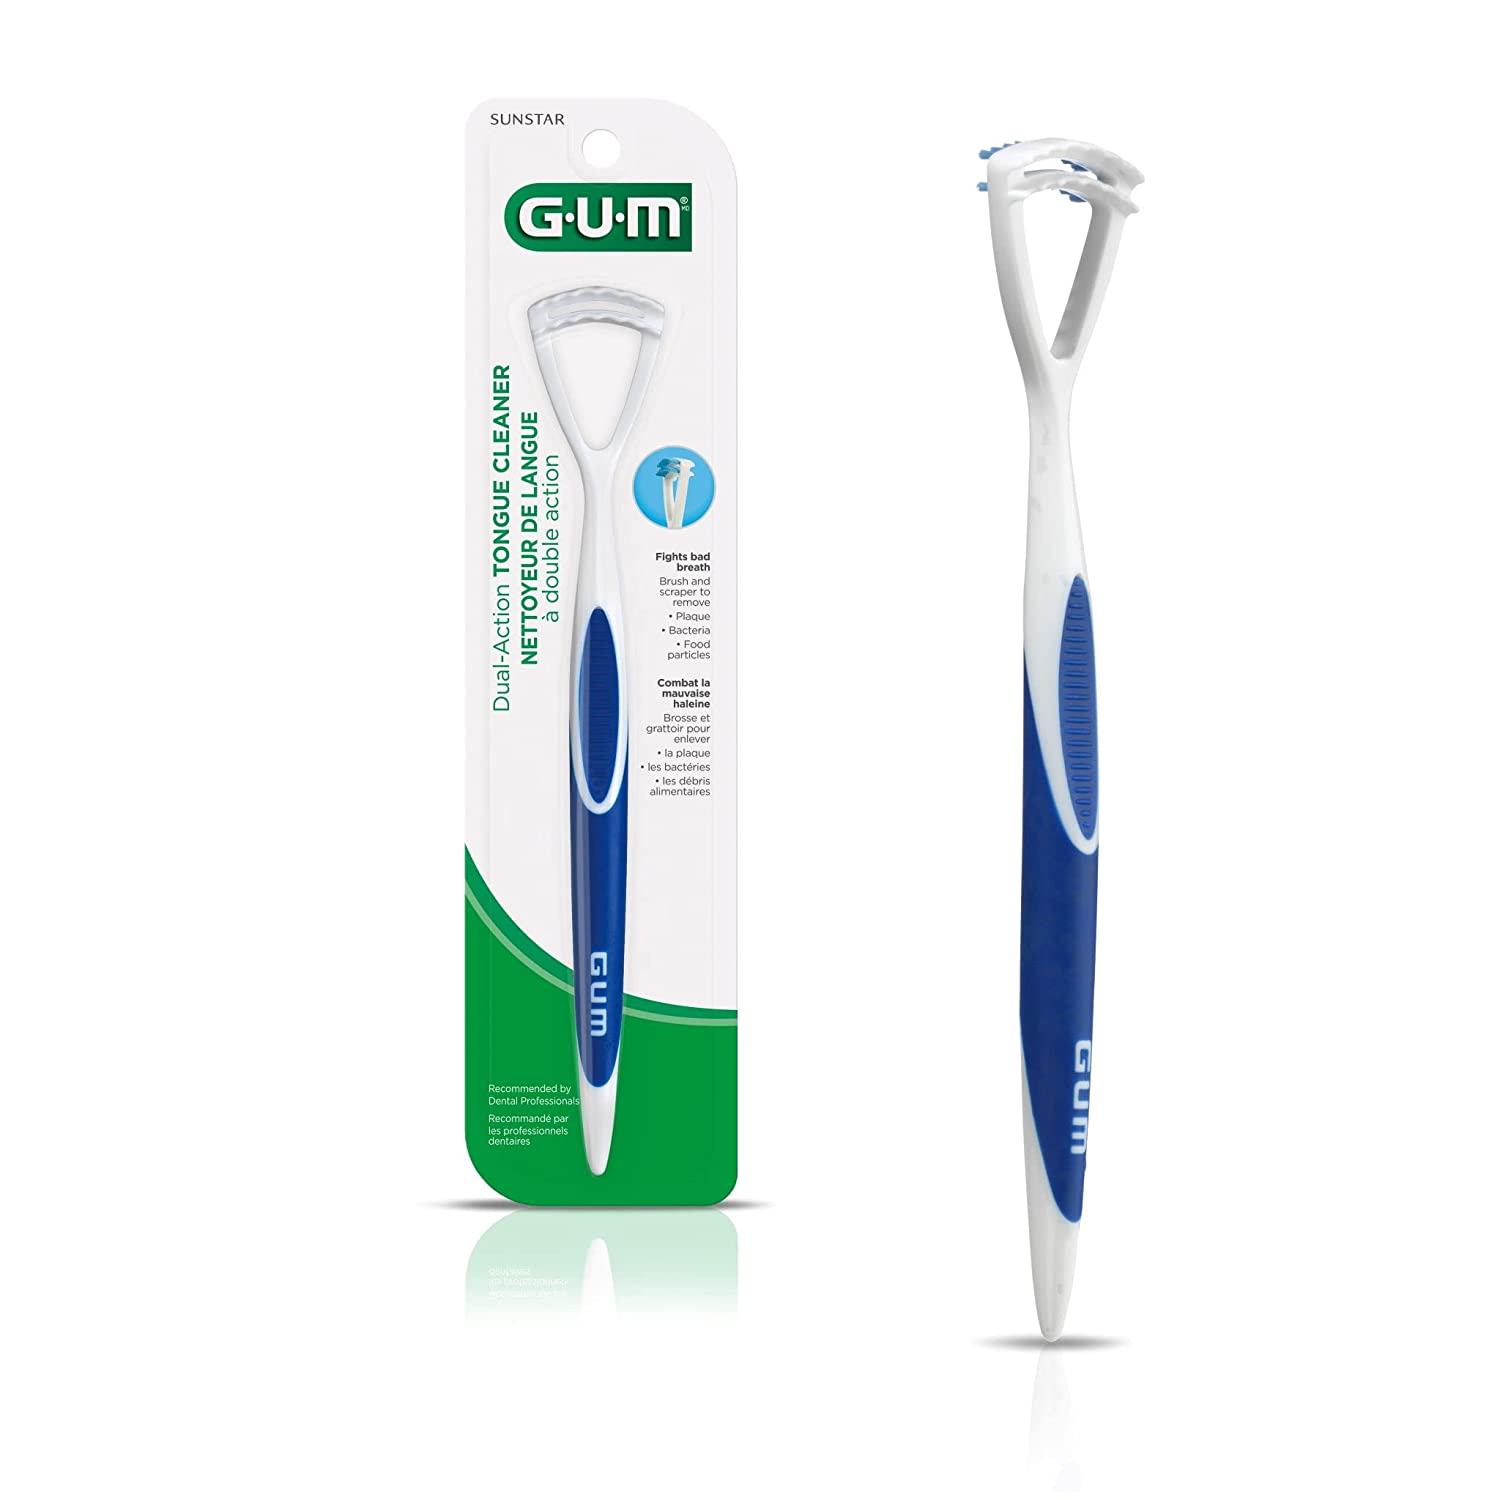 GUM Dual Action Tongue Cleaner - image 1 of 4